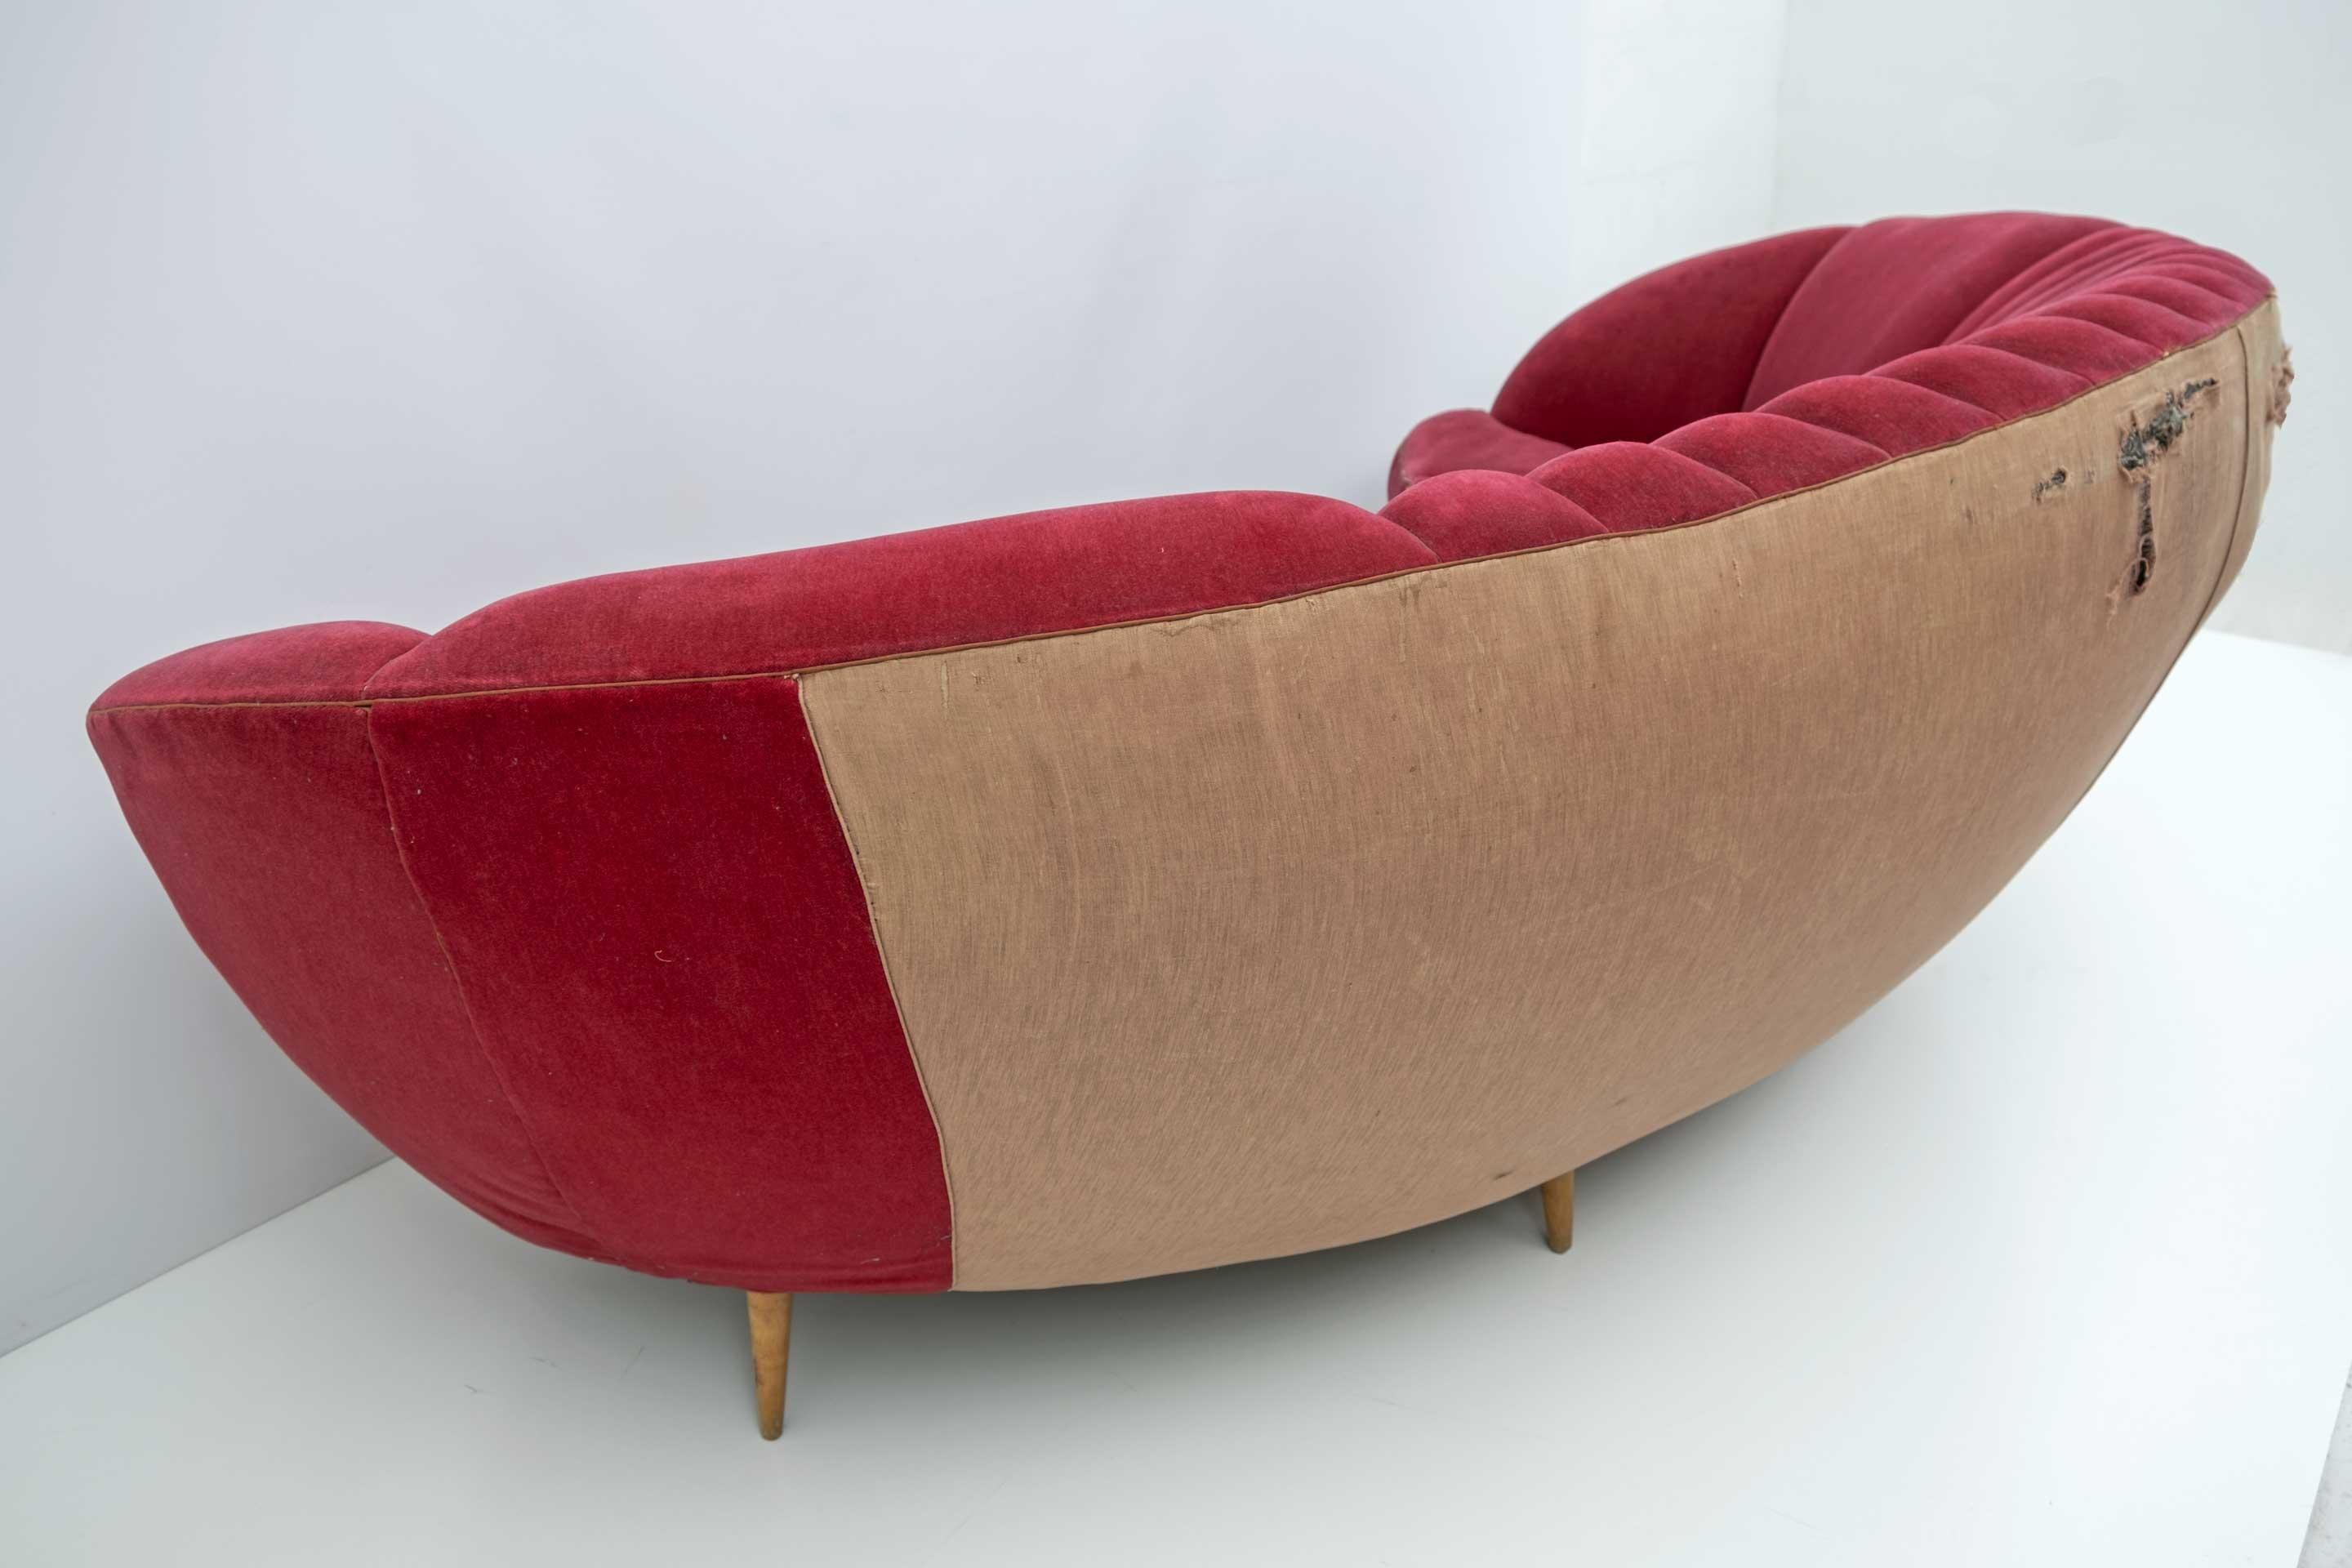 Beech After Gio Ponti Mid-Century Modern Italian Curved Sofa by ISA Bergamo, 50s For Sale